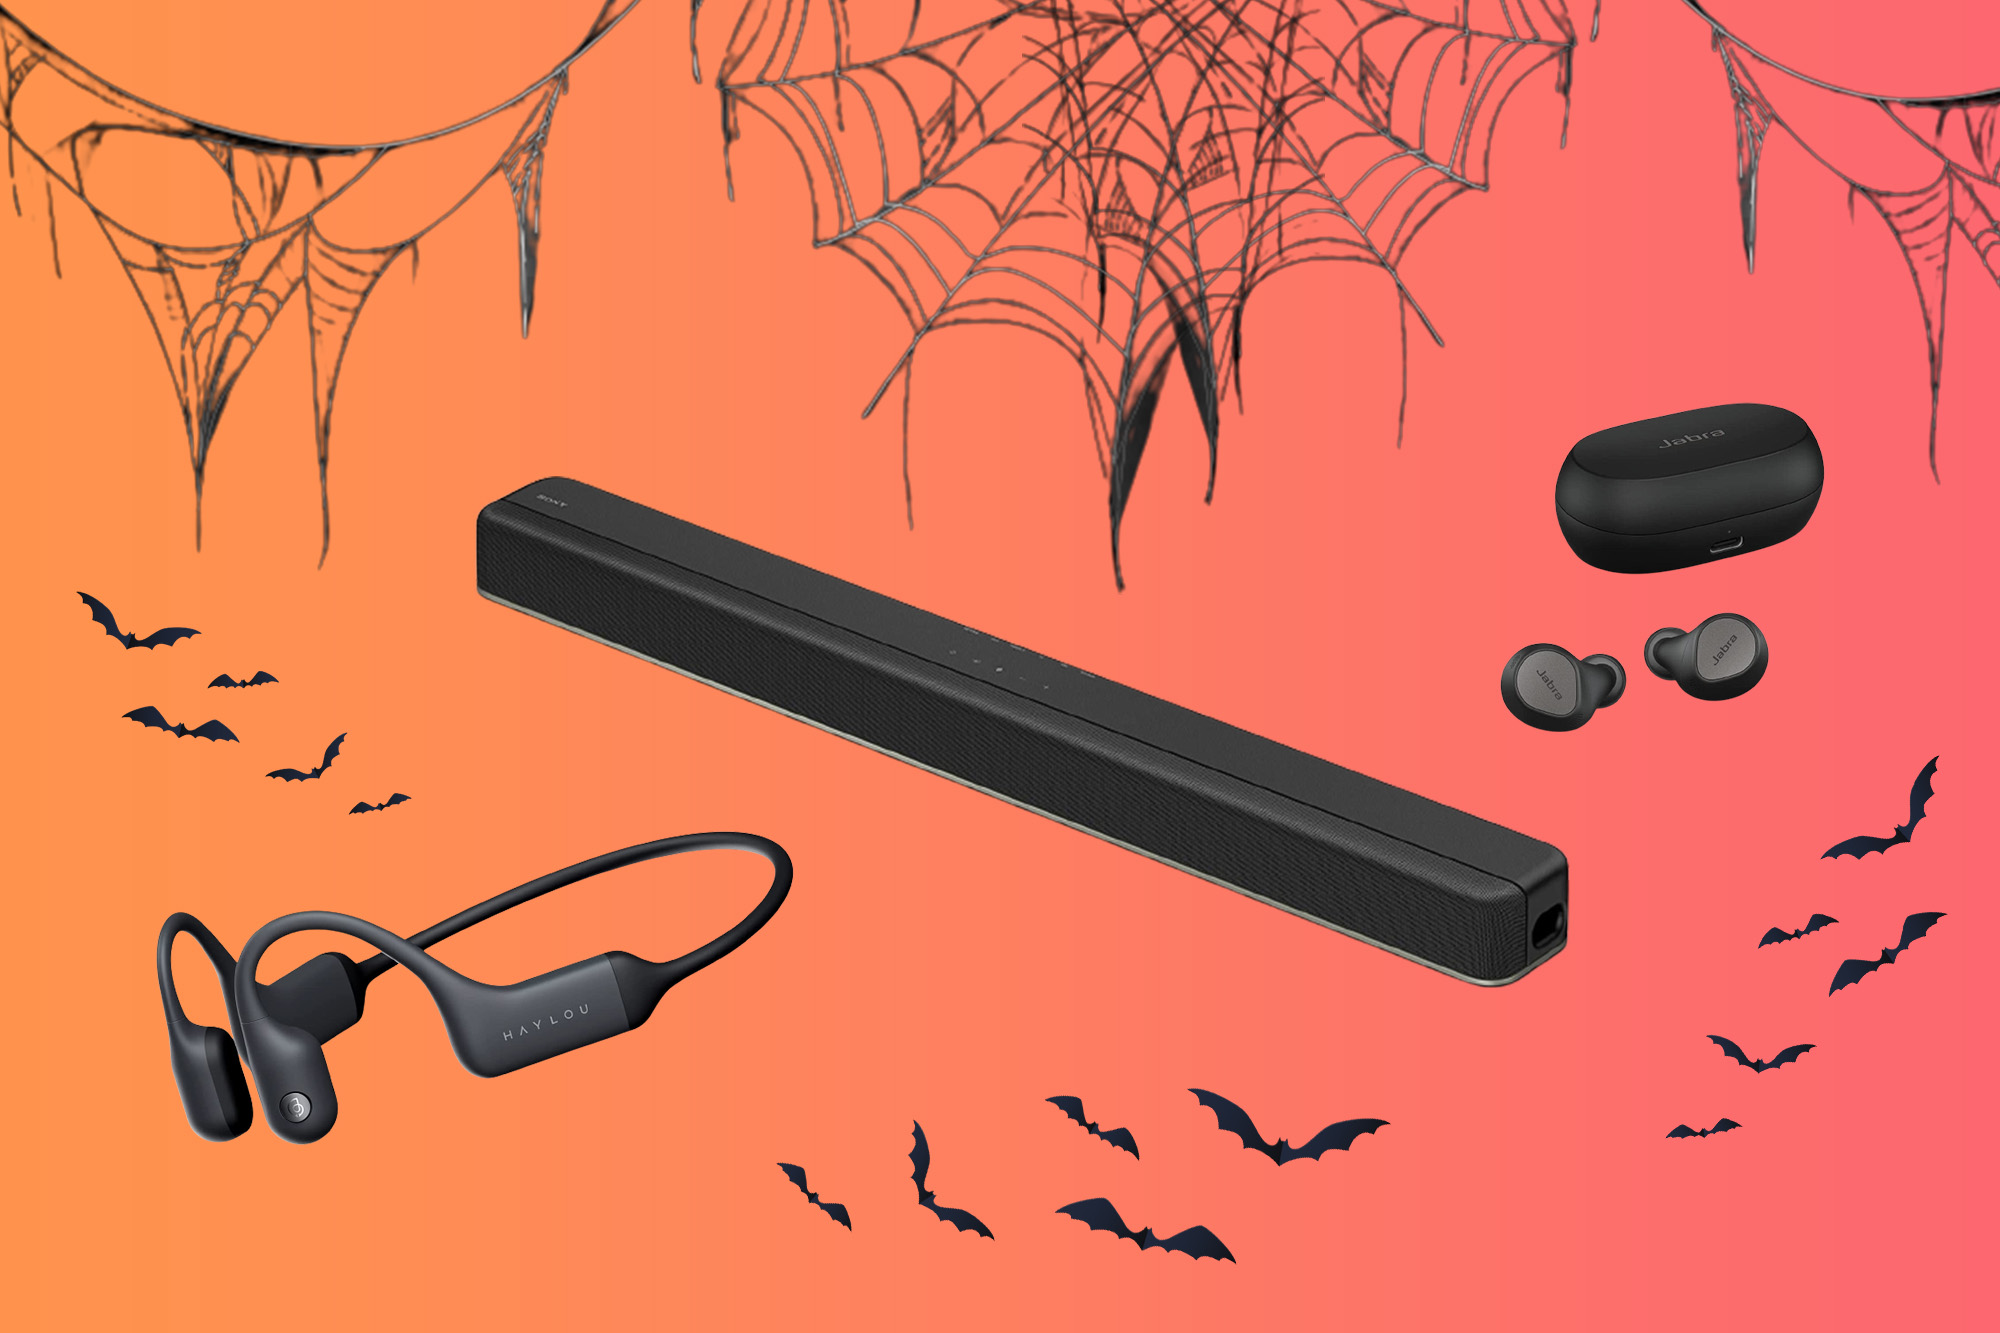 Pump up the Halloween jams—and pre-Black Friday savings—with these scarily good audio deals